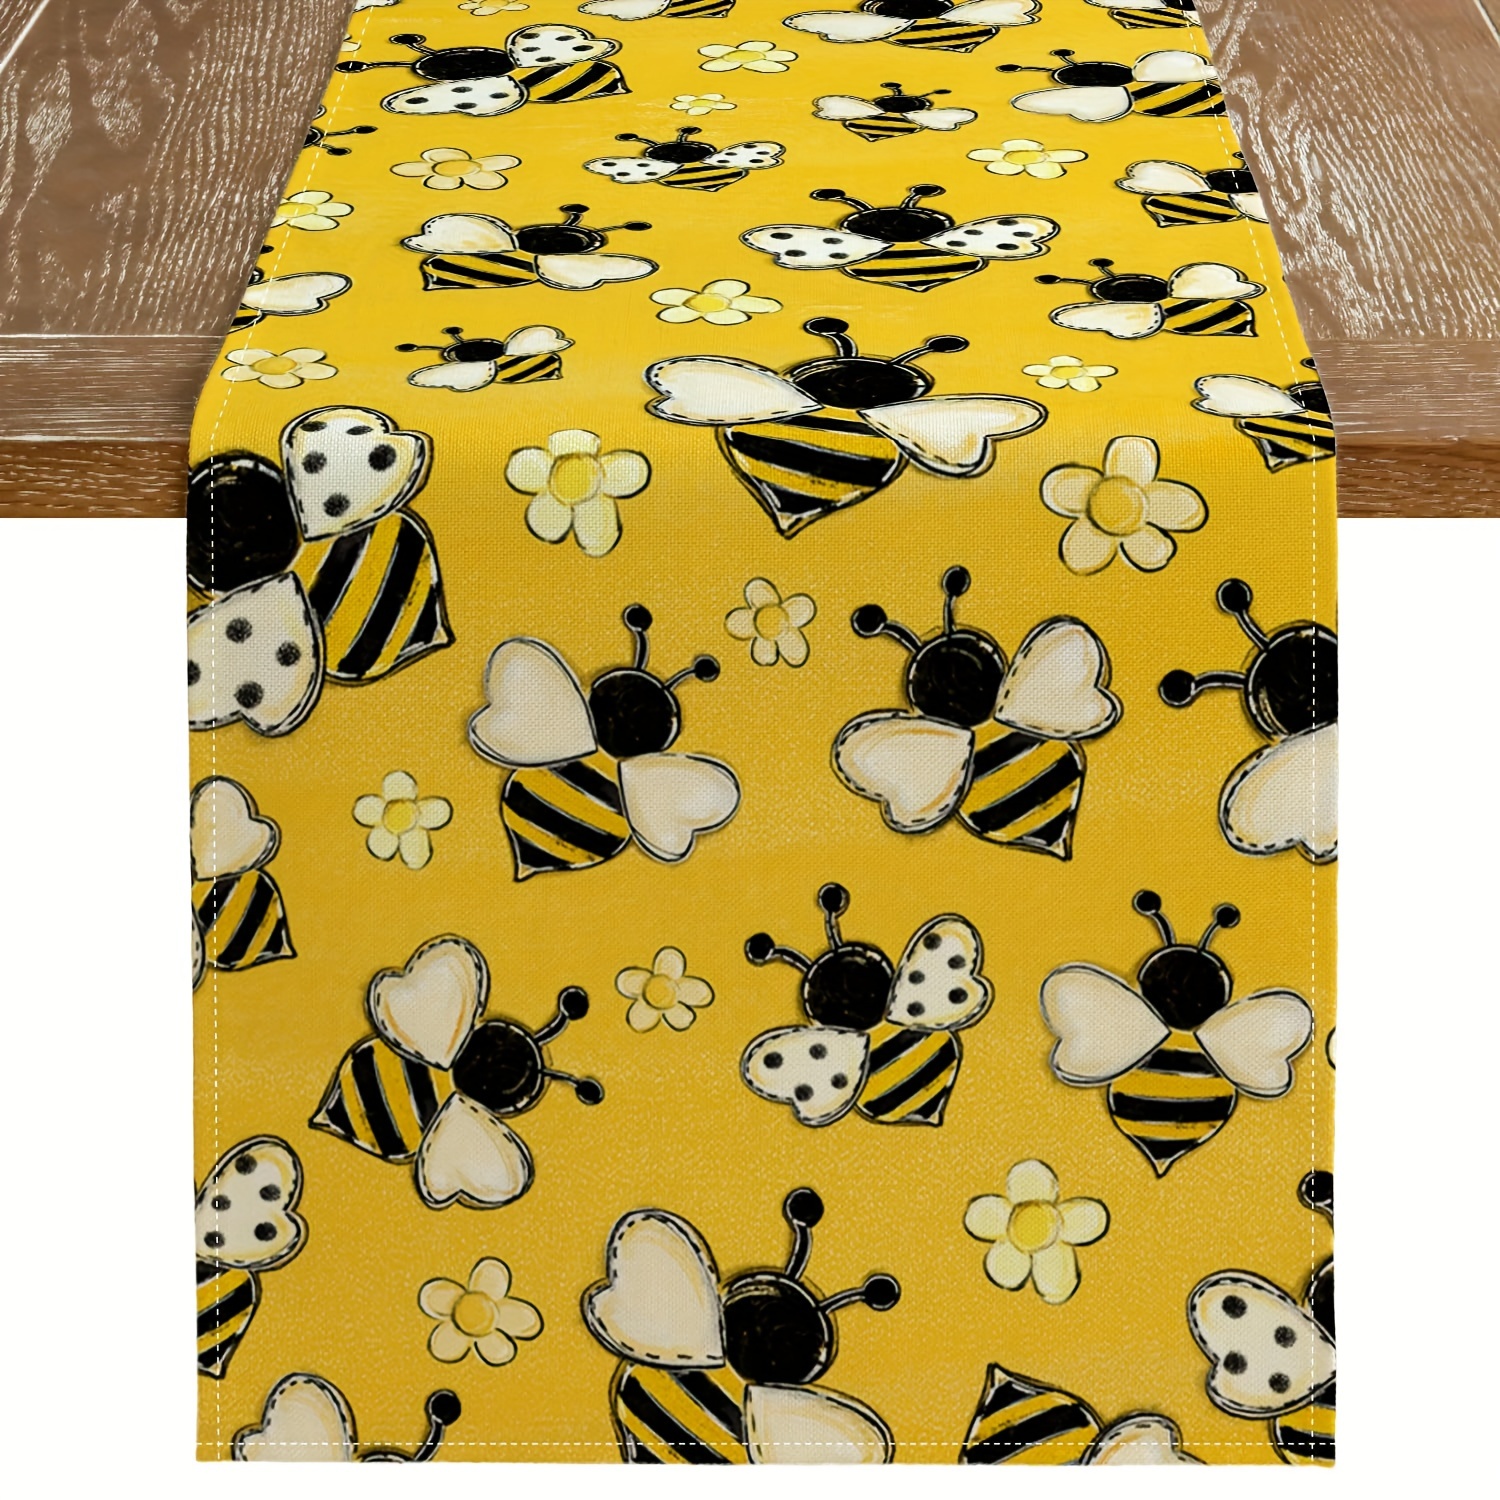 

1pc, Table Runner, Cute Floral And Bee Printed Table Runner, Summer Theme Cartoon Style Dustproof & Wipe Clean Table Runner, Perfect For Home Party Decor, Dining Table Decoration, Aesthetic Room Decor